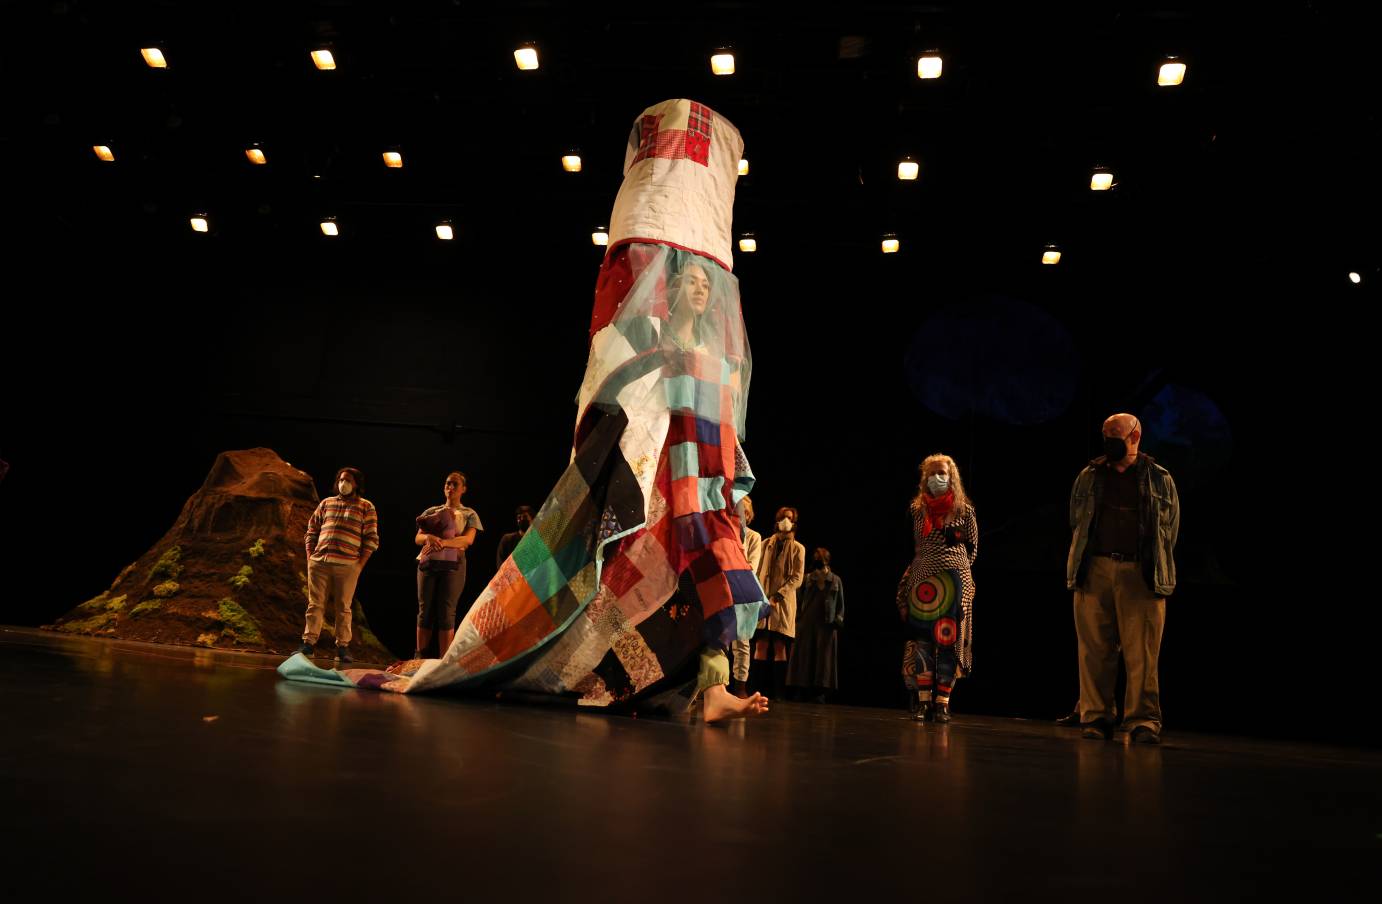 amongst a crowd of onlookers on stage walks a woman dressed in an elaborate quilt sculpture